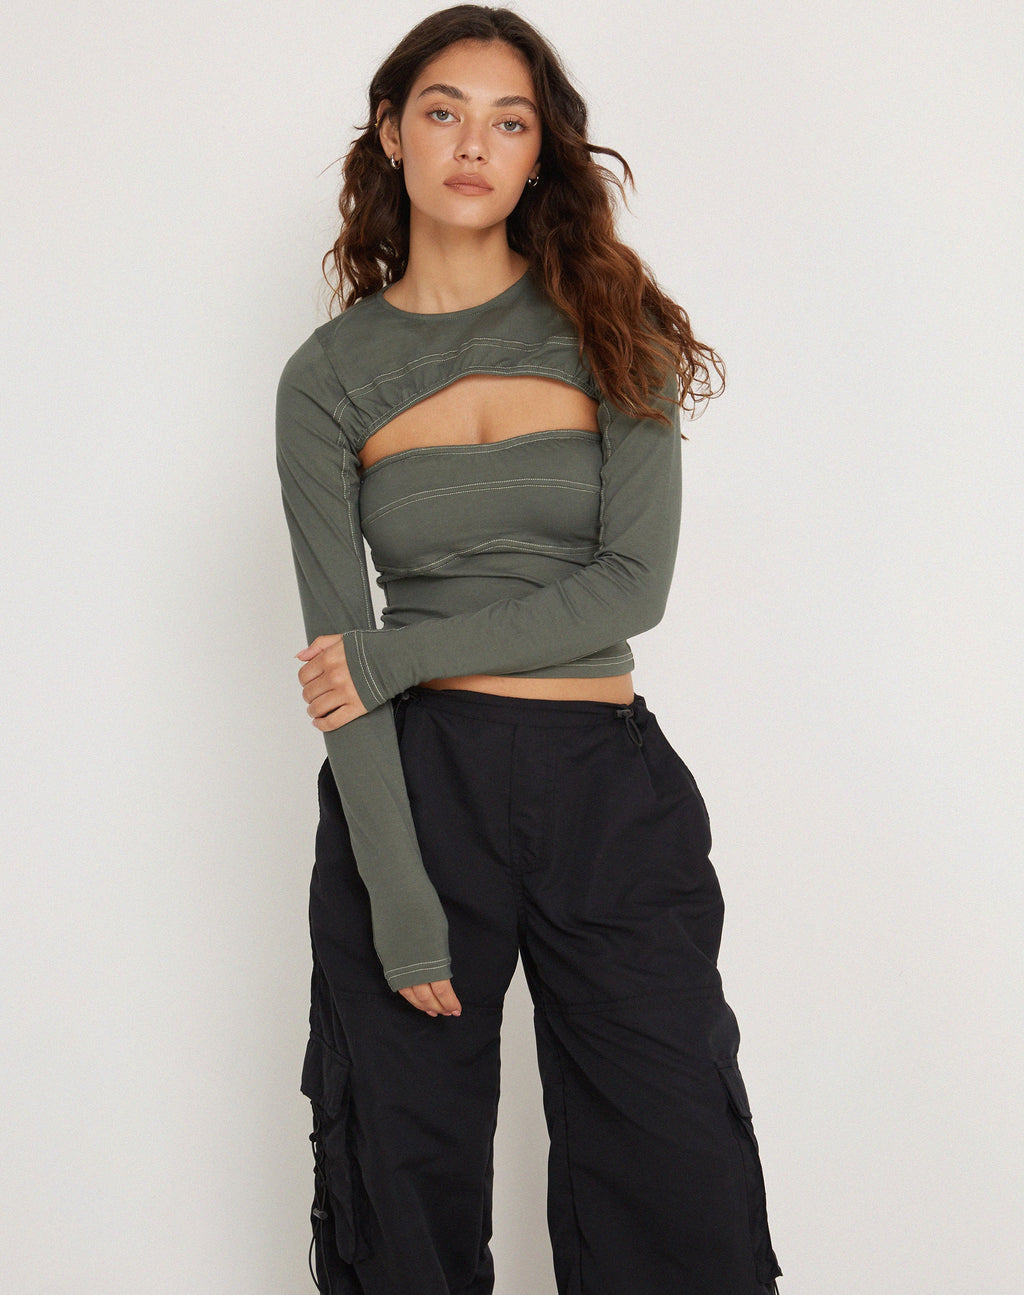 Matea Long Sleeve Top in Duck Green with Yellow Top Stitch